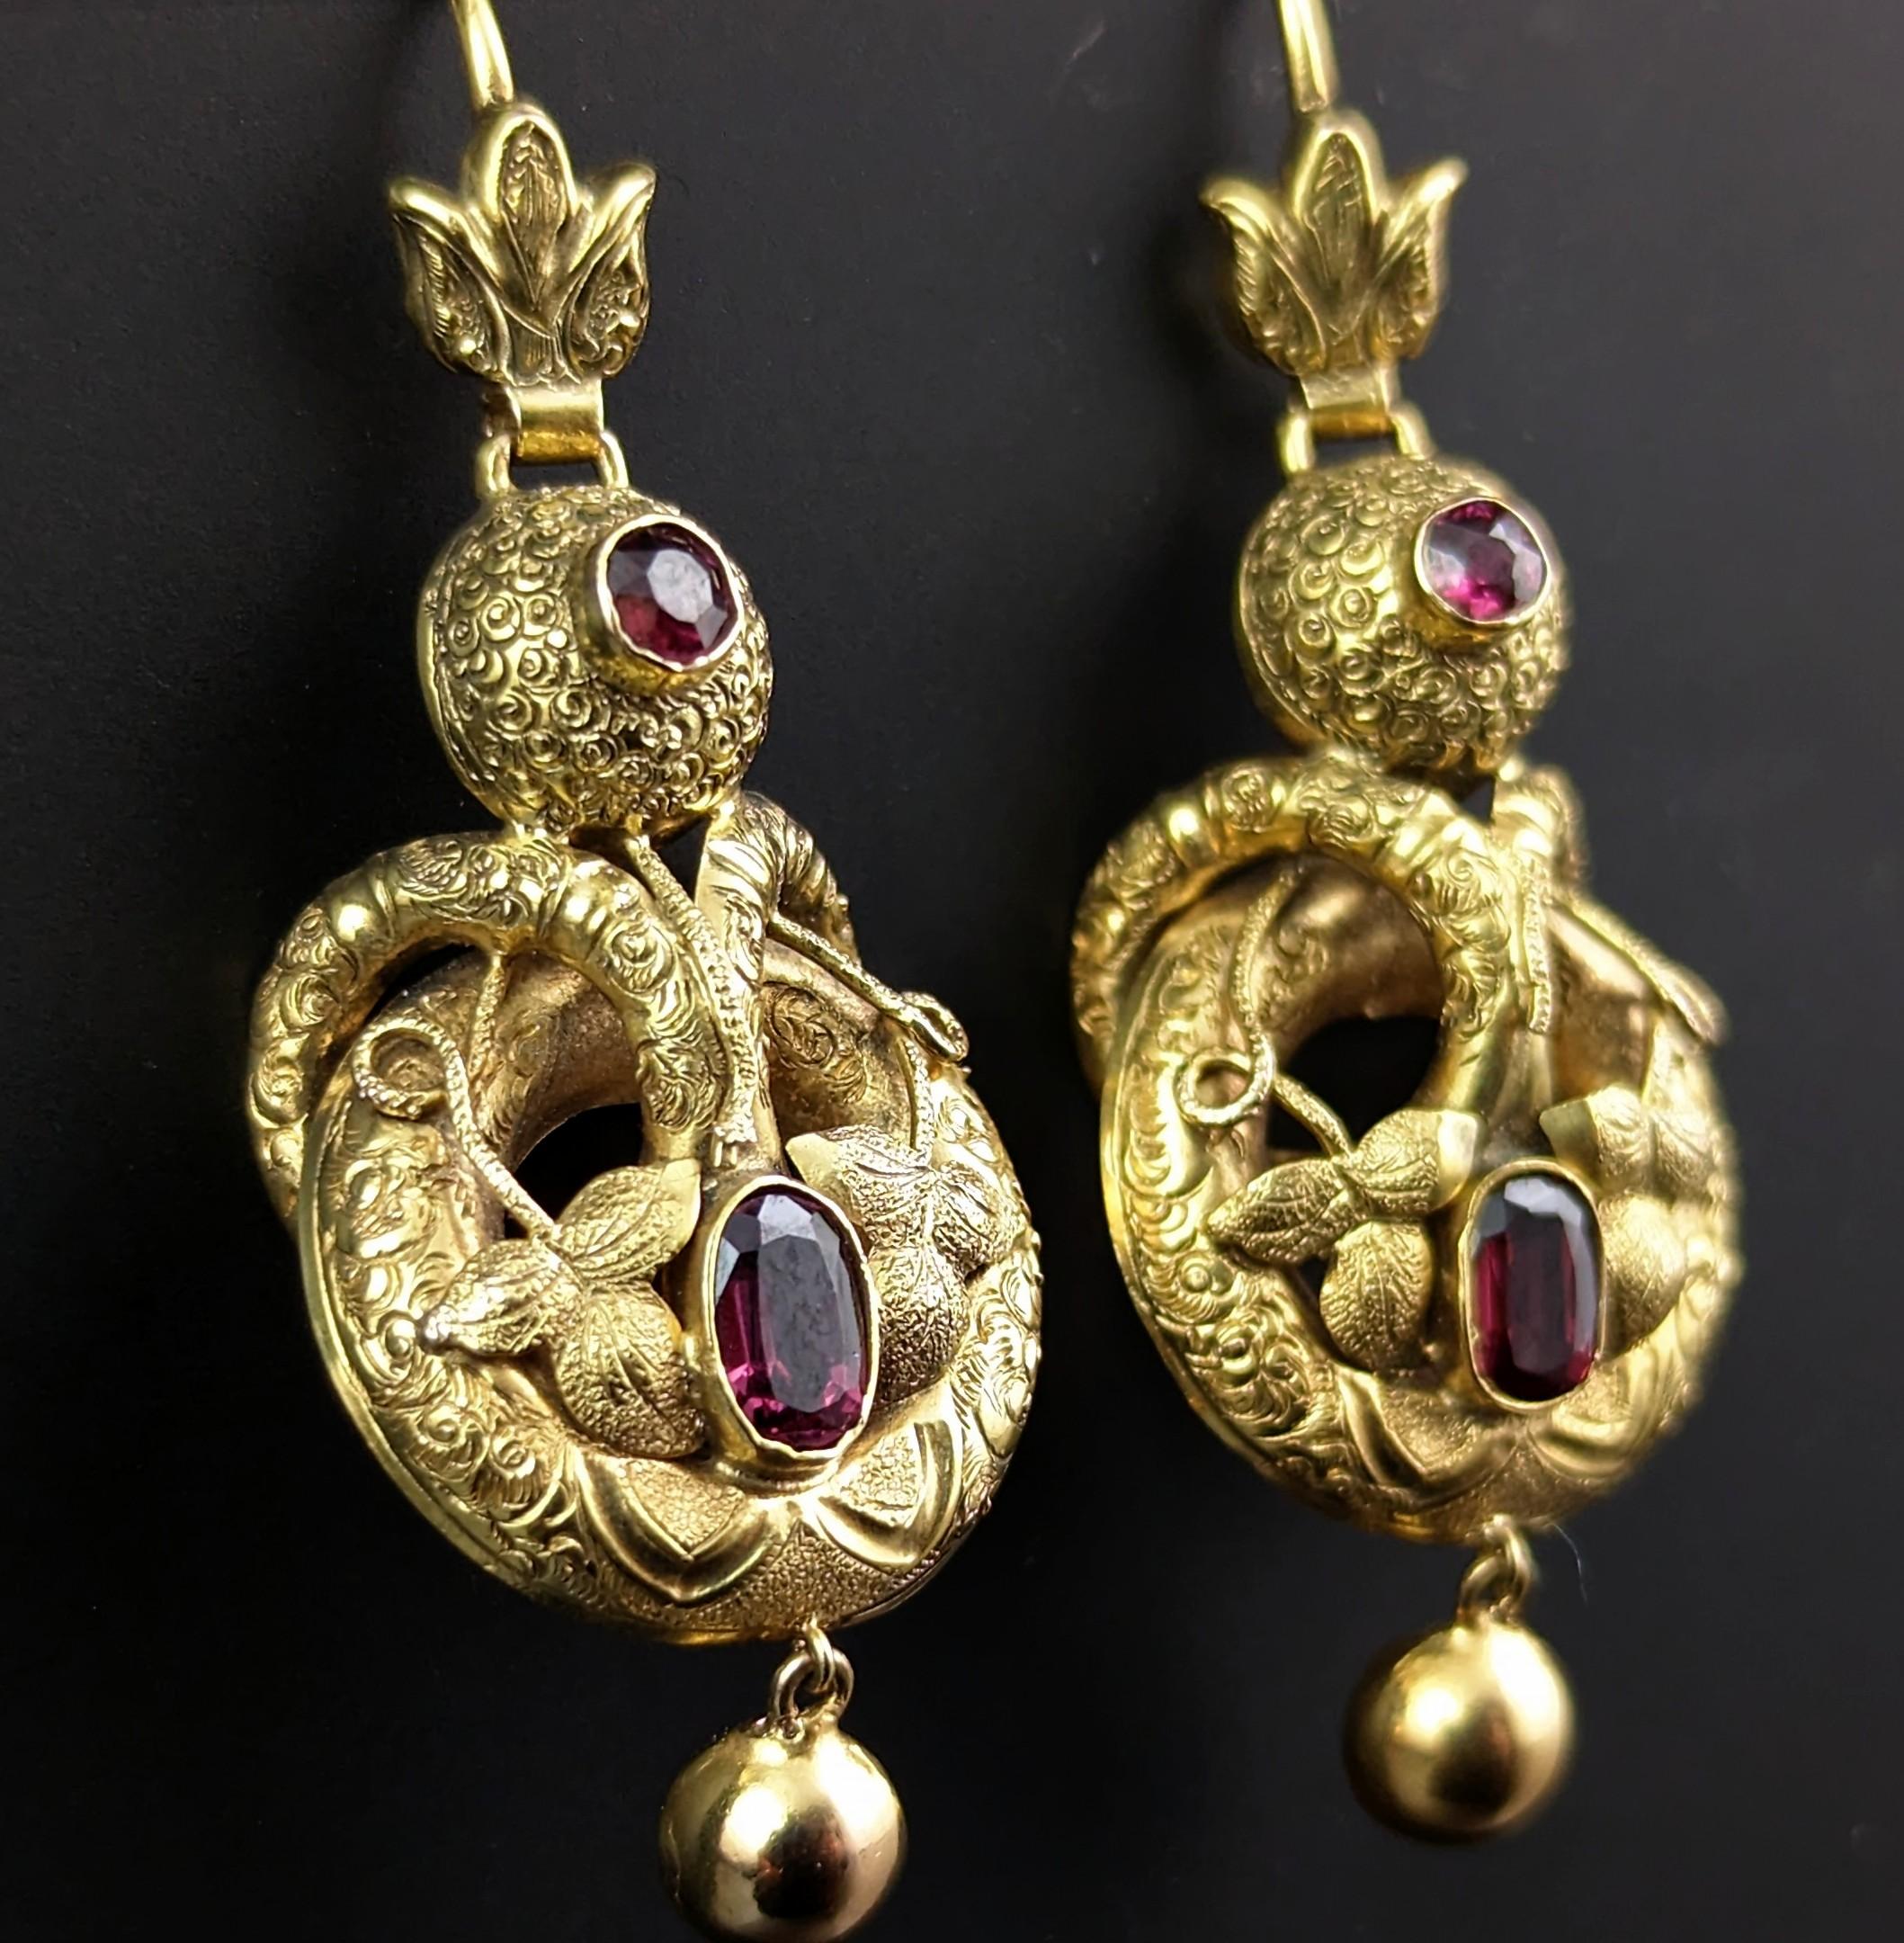 Antique Victorian Garnet Drop Earrings, 18 Carat Gold, Leaves and Vine For Sale 4